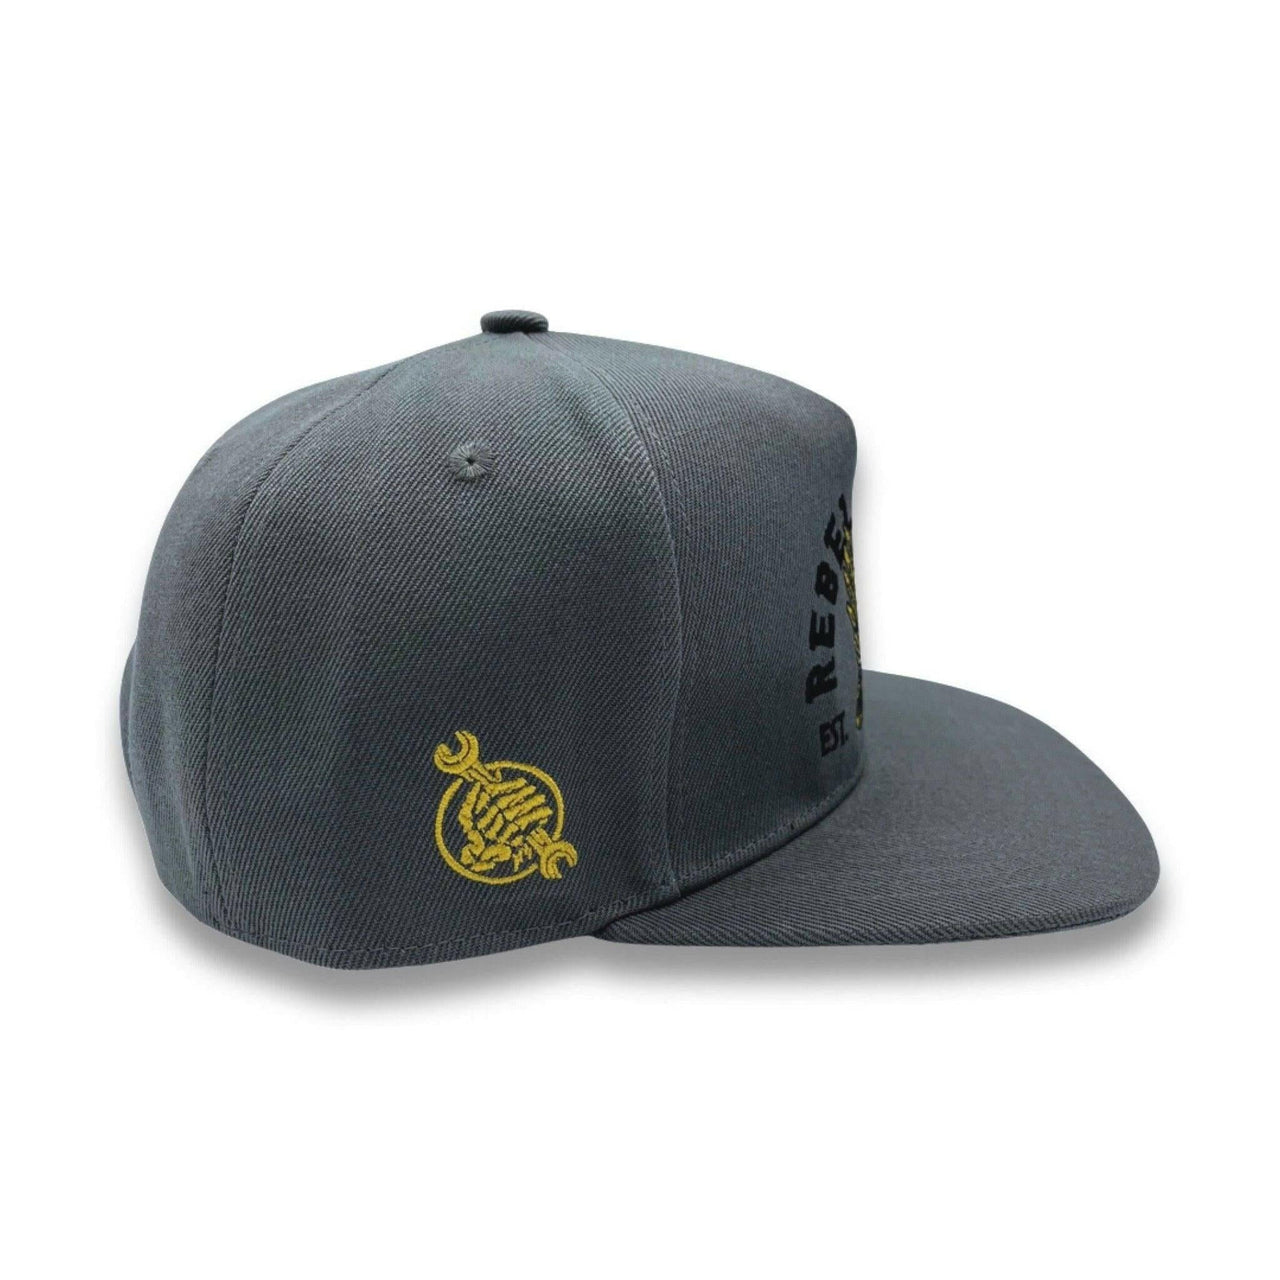 Grey Quality Goods Embroidered Snapback - Rebel Reaper Clothing Company Hats - Snapback